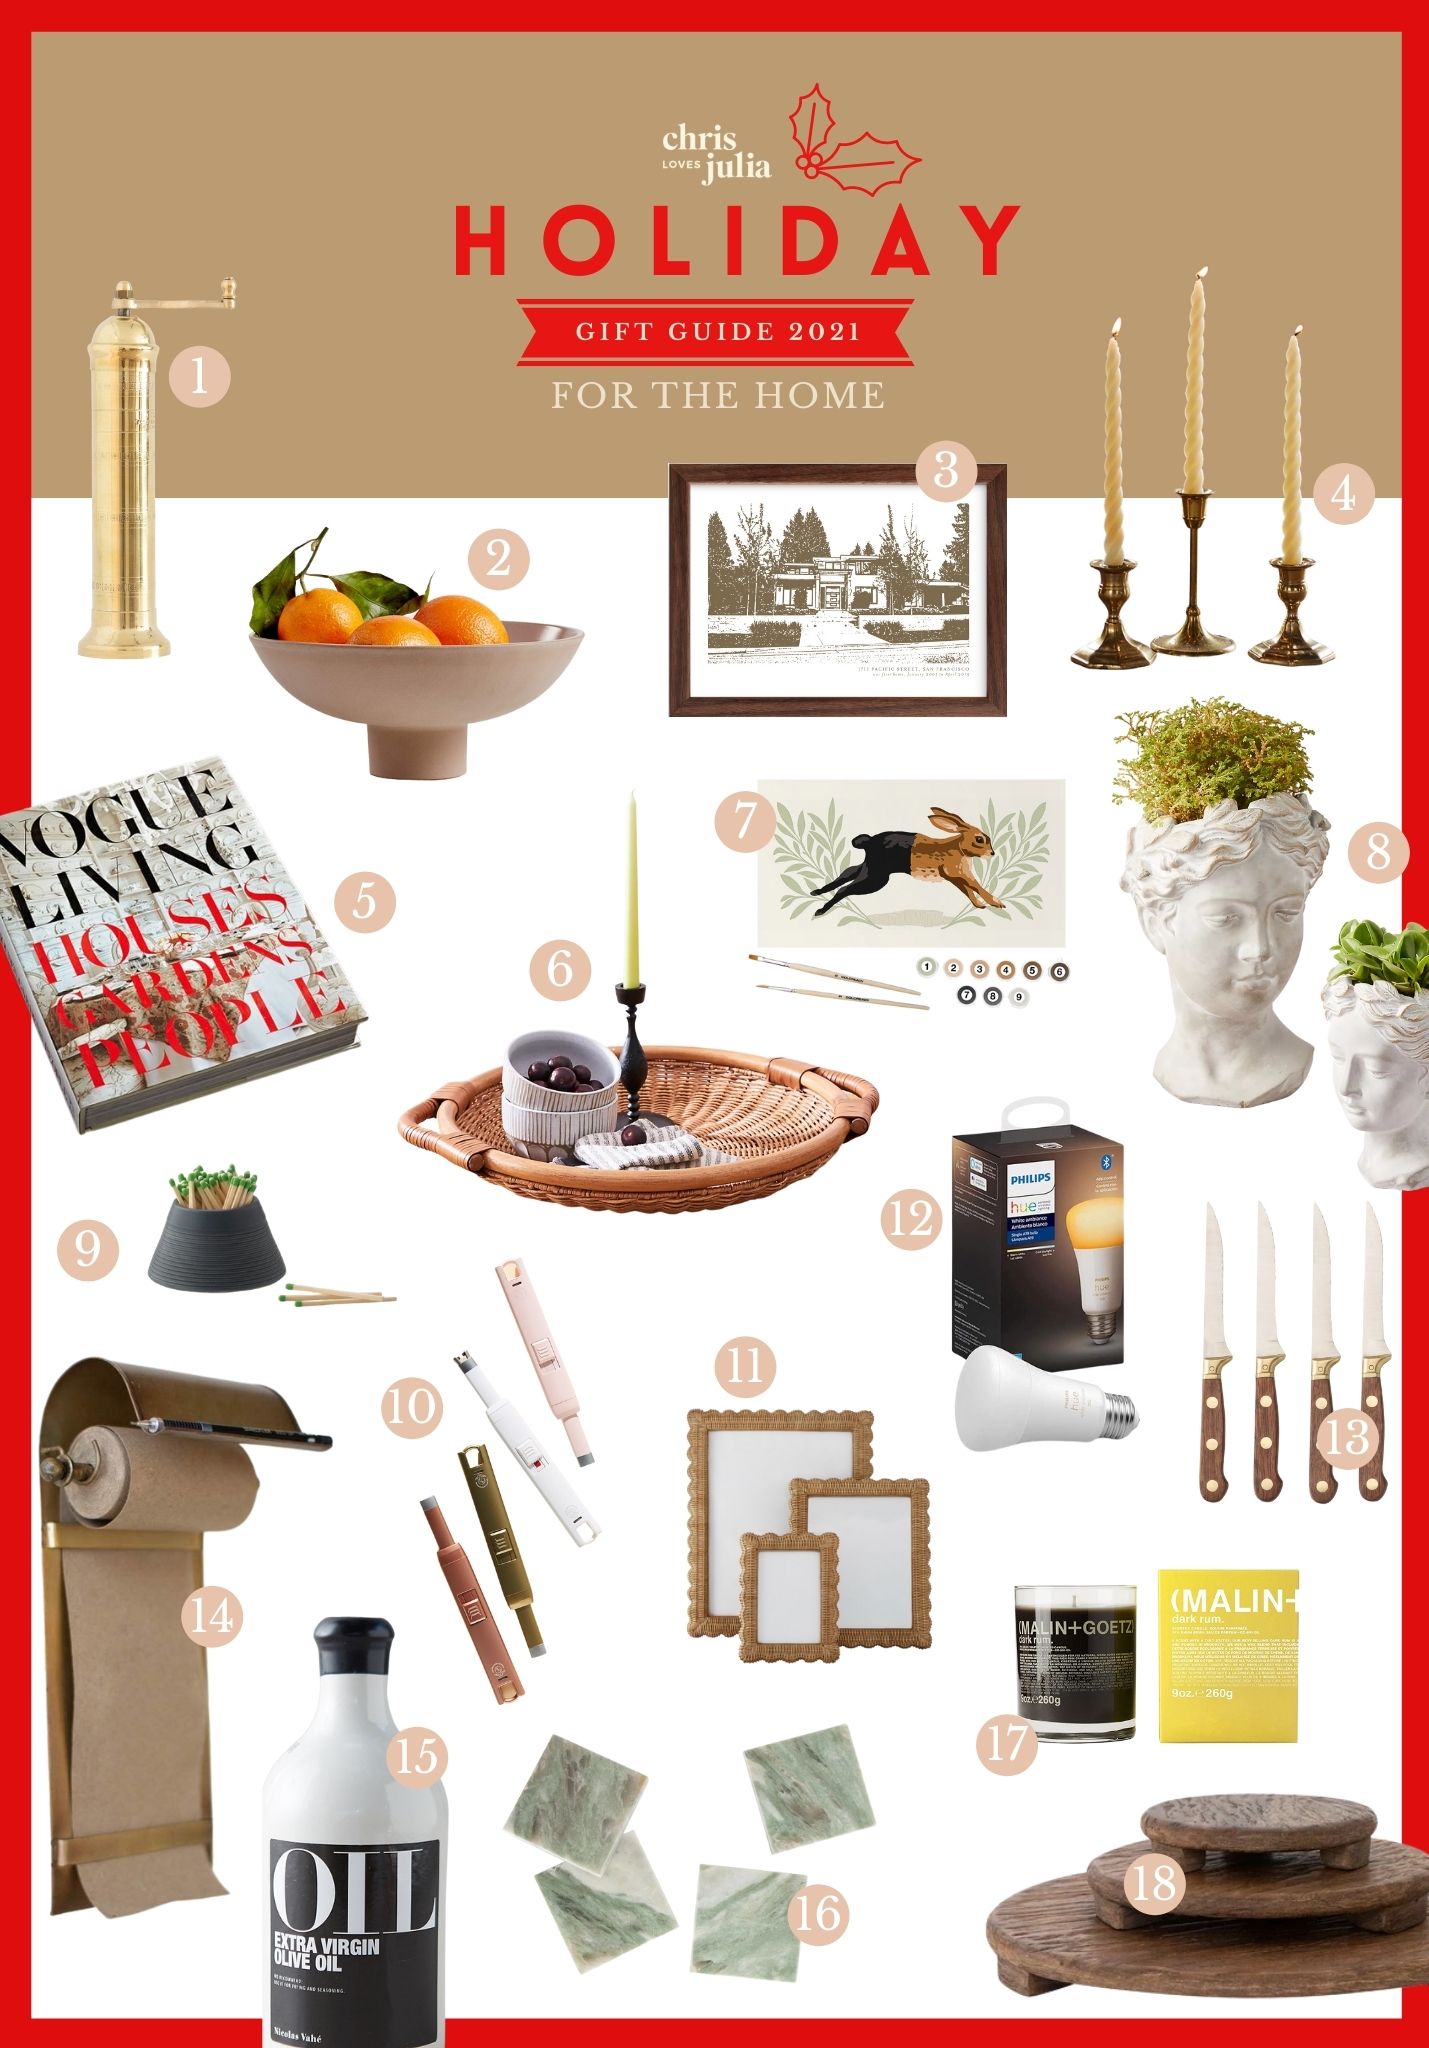 More Like Home: 2021 Gift Guide for Adults